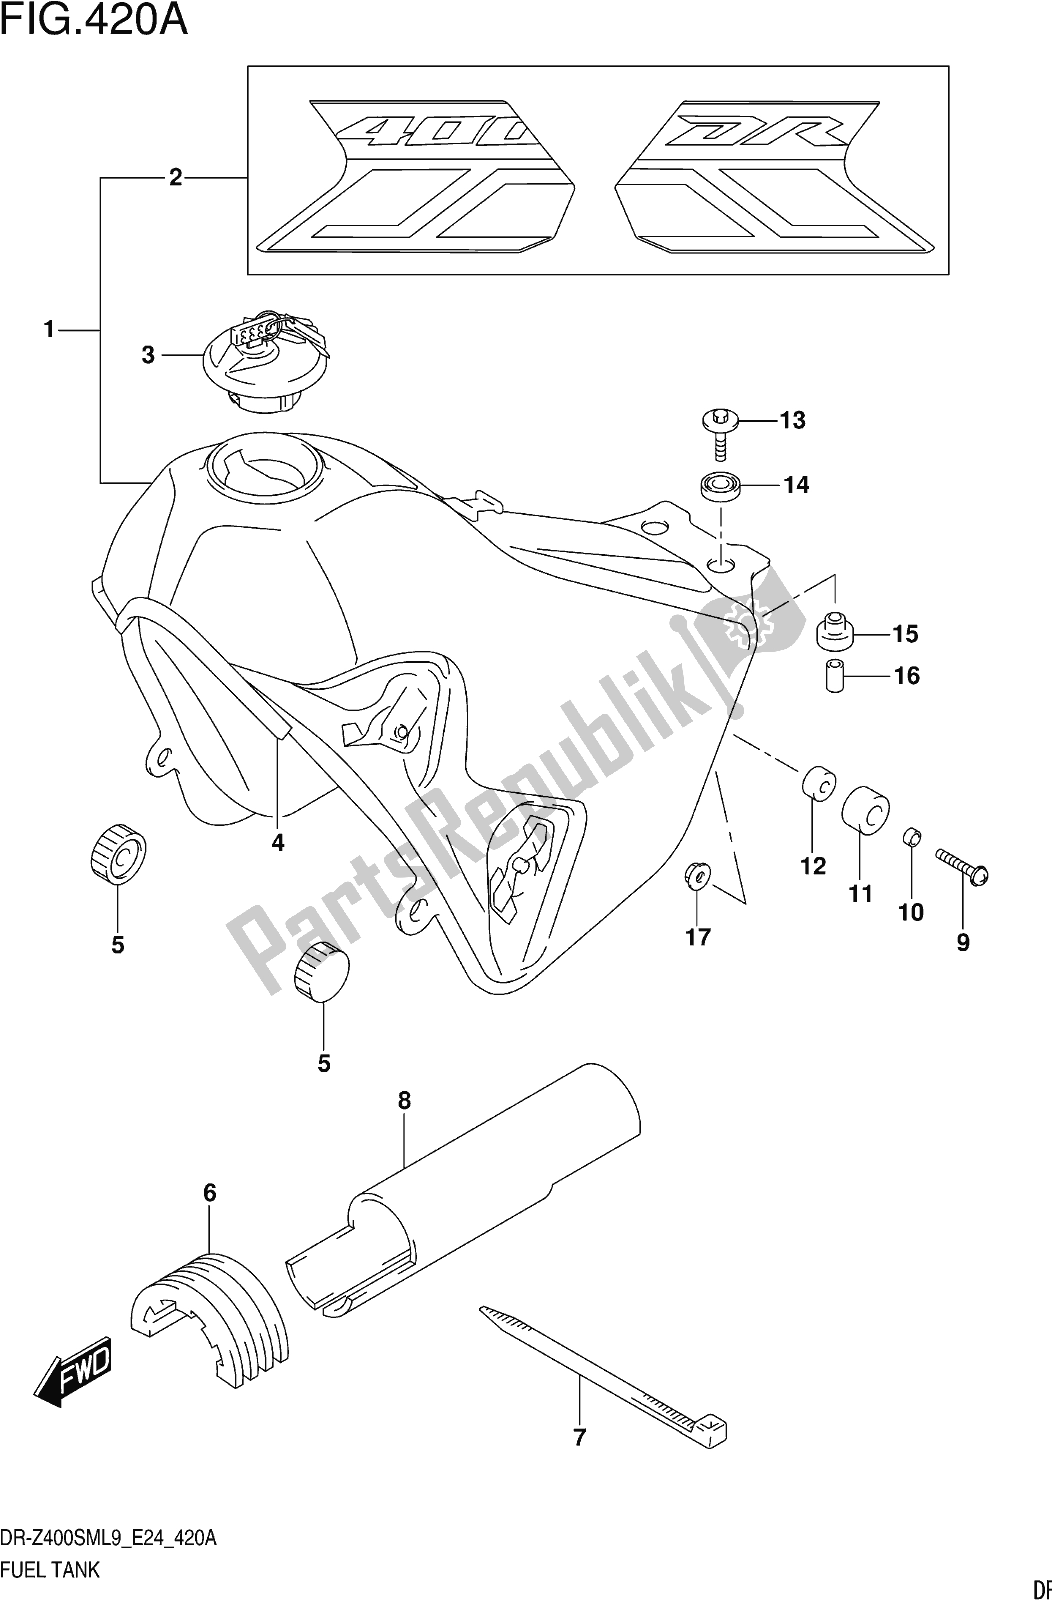 All parts for the Fig. 420a Fuel Tank of the Suzuki DR-Z 400 SM 2019